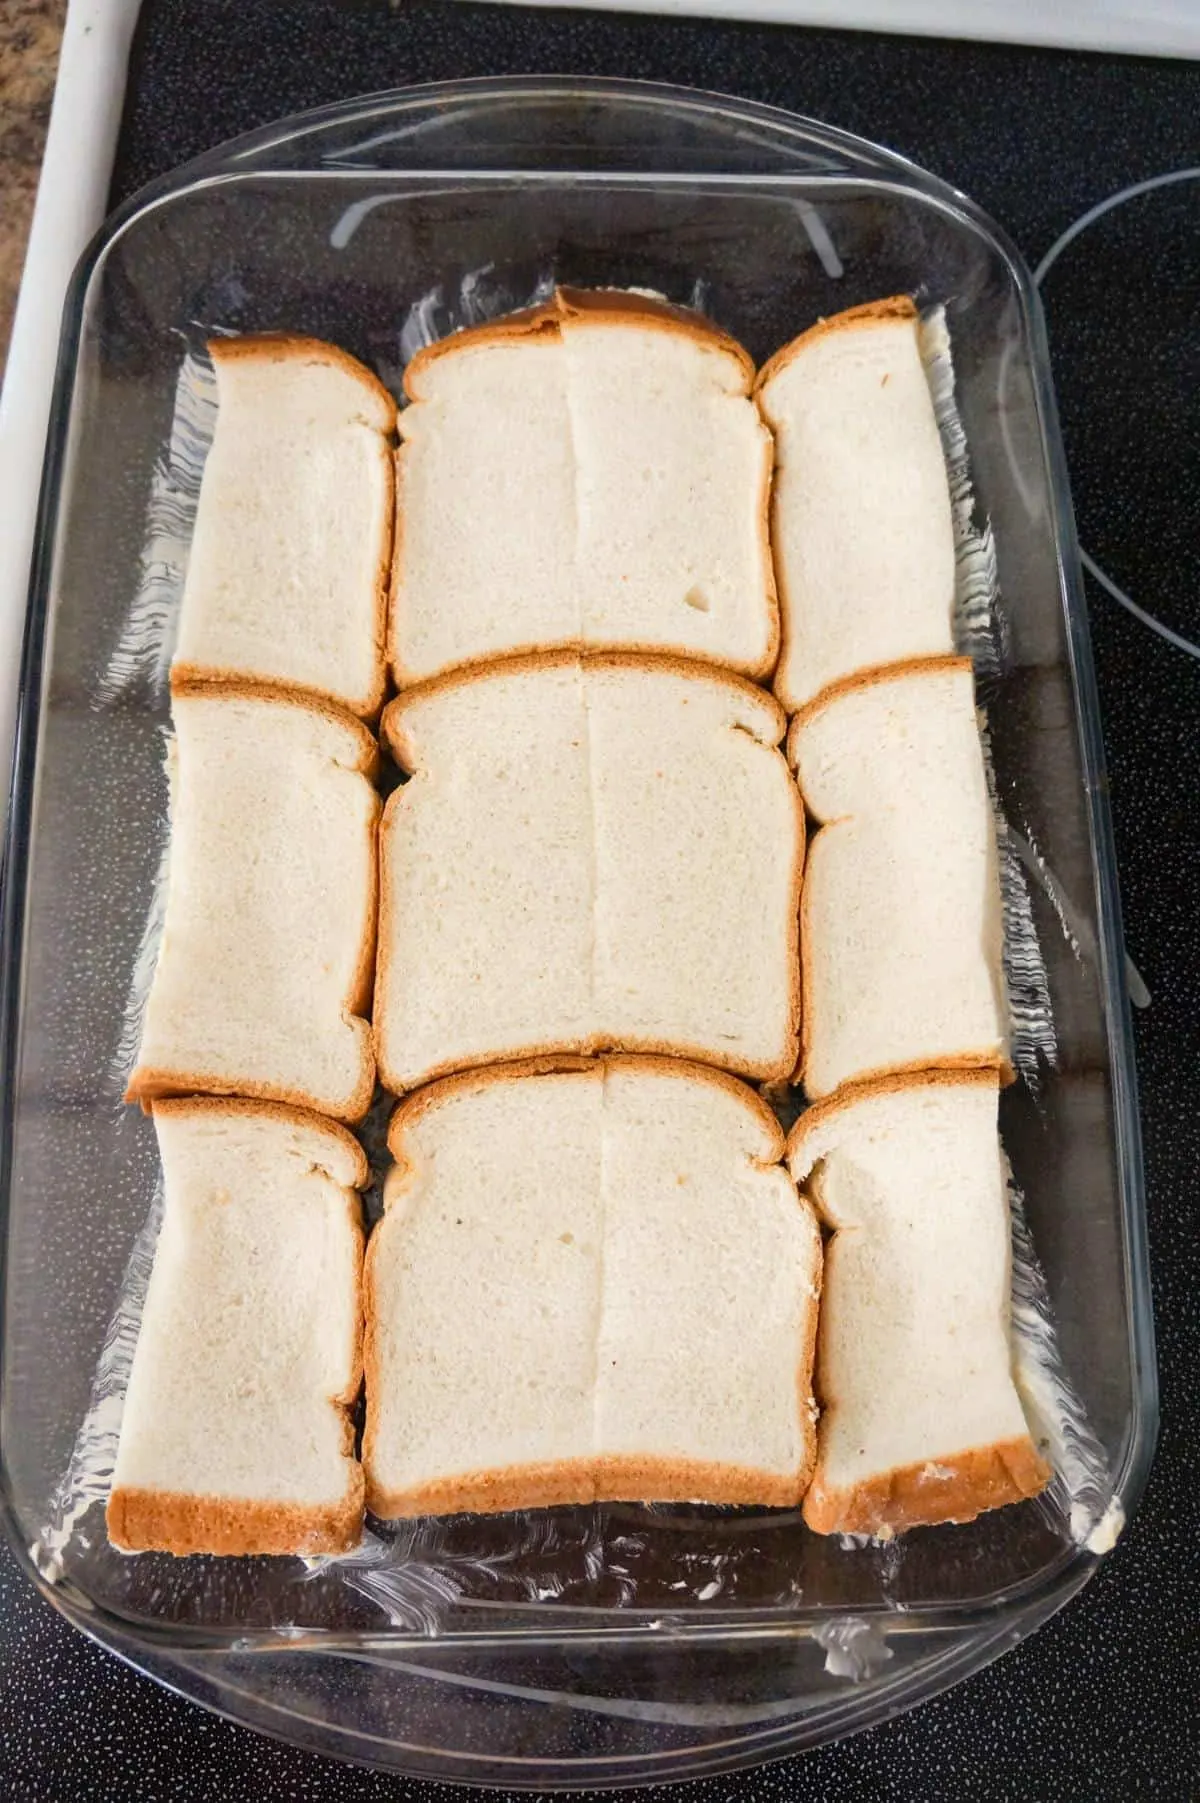 slices of bread in the bottom of a baking dish